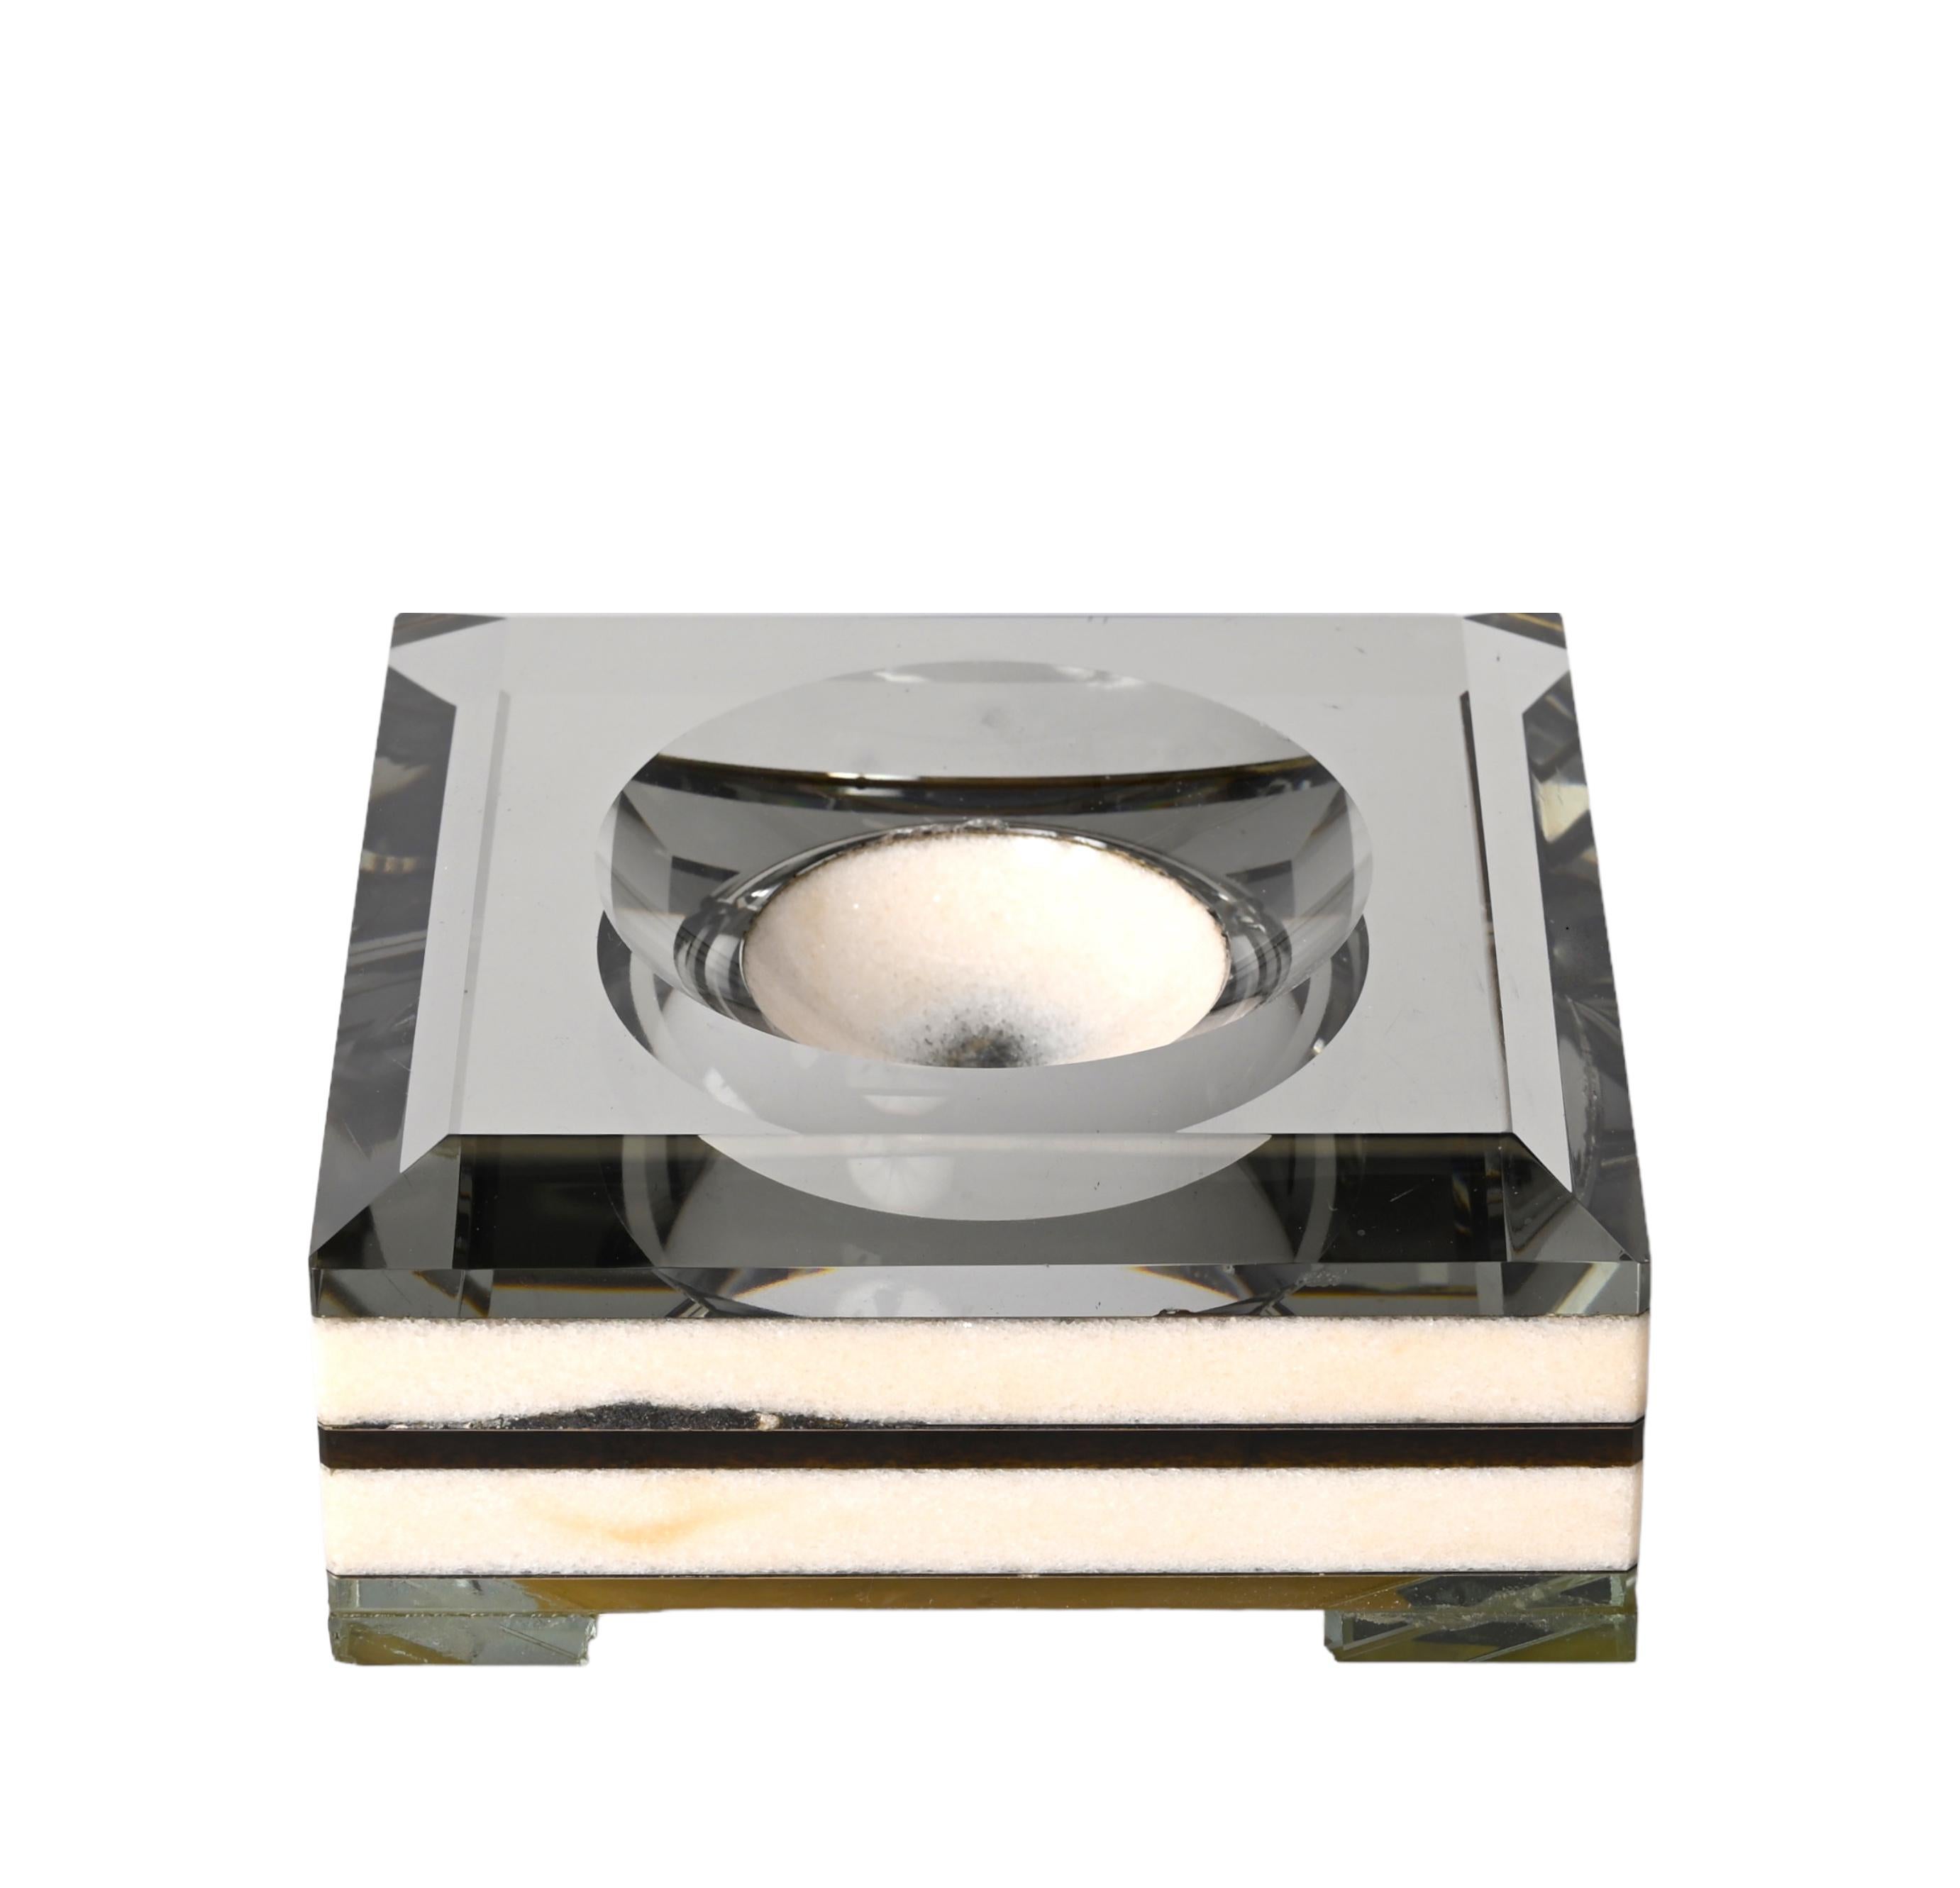 Elegant midcentury marble and mirrored top ashtray. This fantastic piece was designed in Italy during the 1970s.

Italian designers inspire this wonderful piece from the 1970s for materials (marble, mirror). Its pure and simple lines and the way